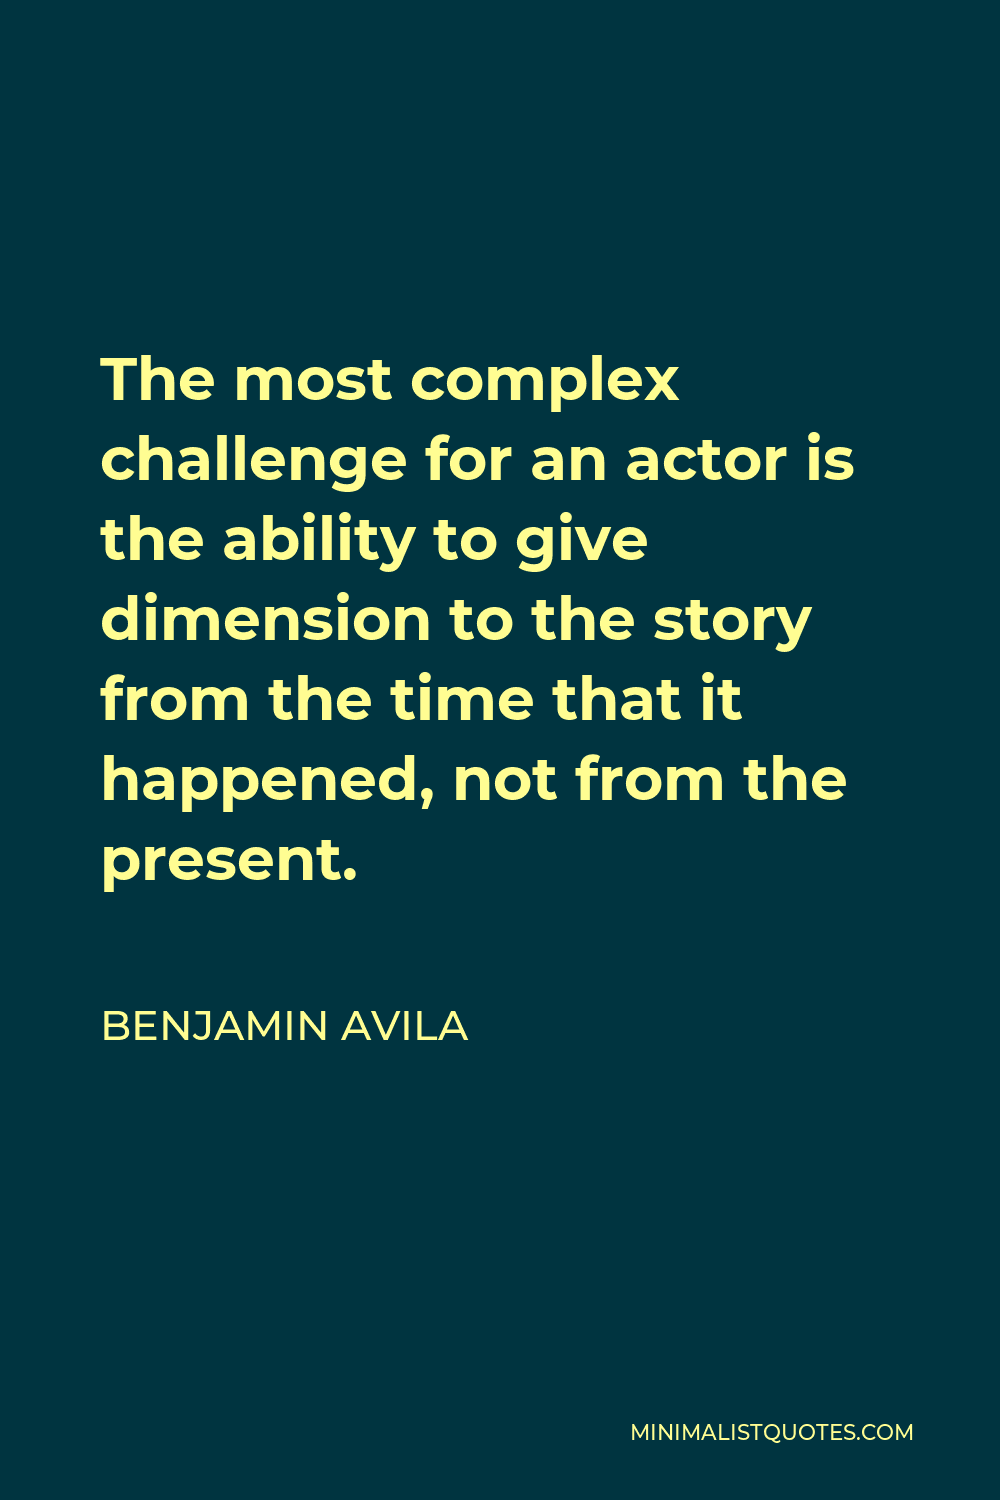 Benjamin Avila Quote - The most complex challenge for an actor is the ability to give dimension to the story from the time that it happened, not from the present.